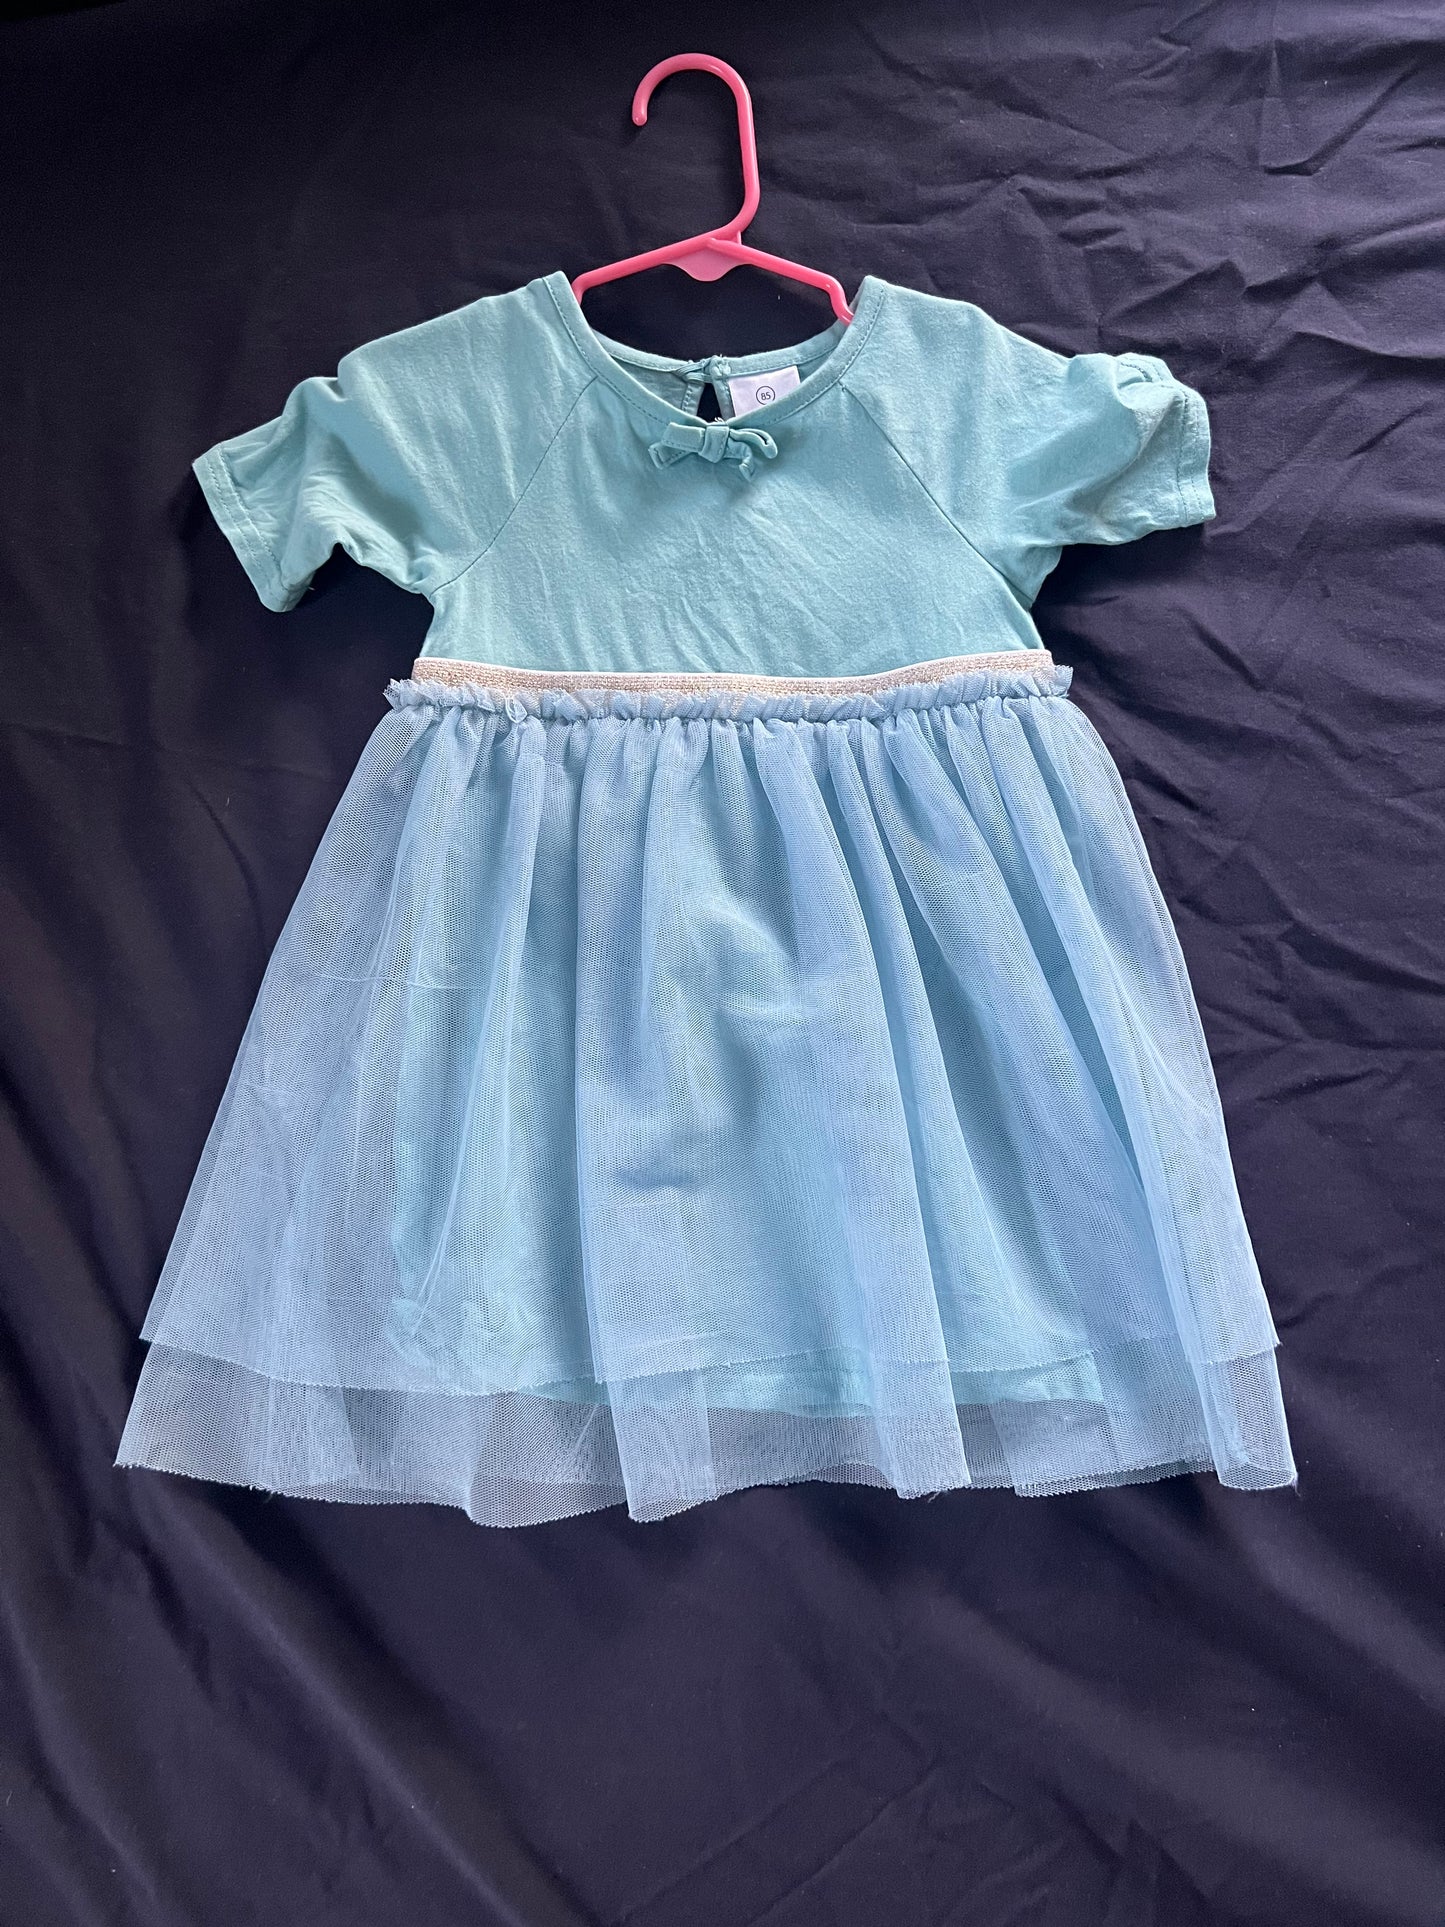 Hanna Andersson Blue Tulle Dress 2T